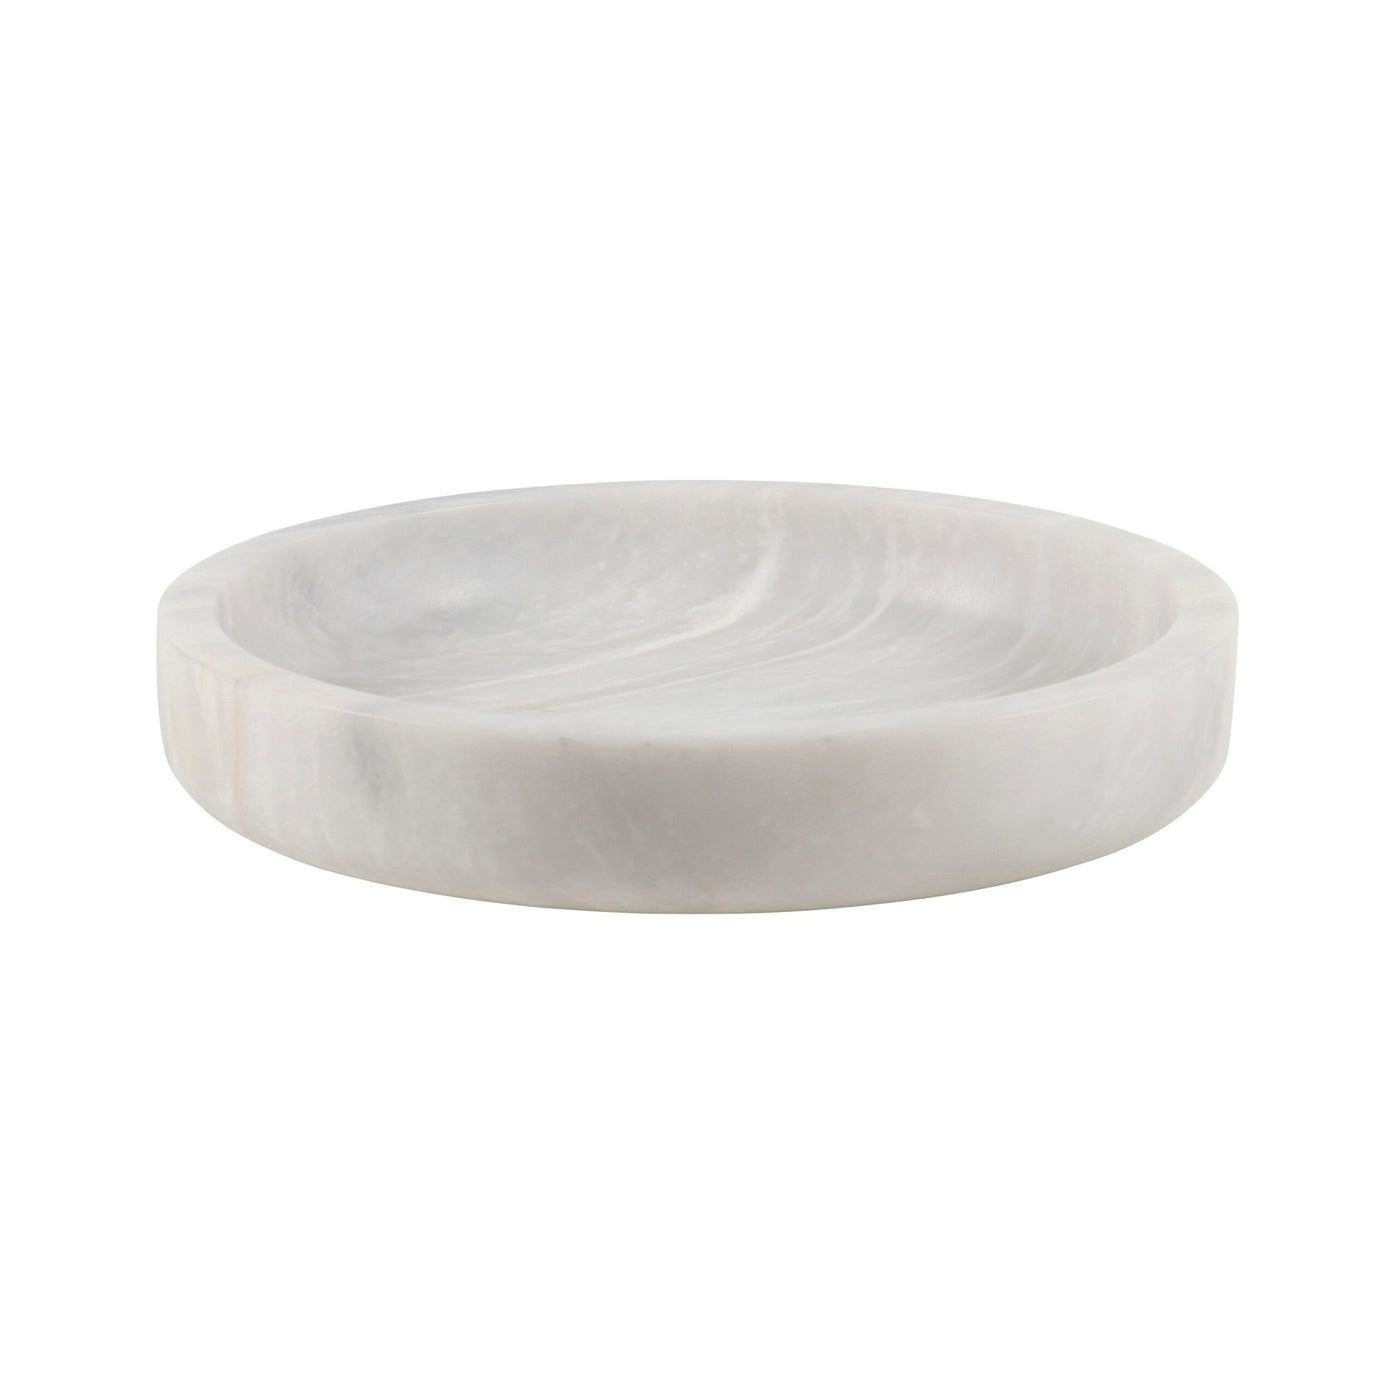 BOWL MARBLE PEARL WHITE